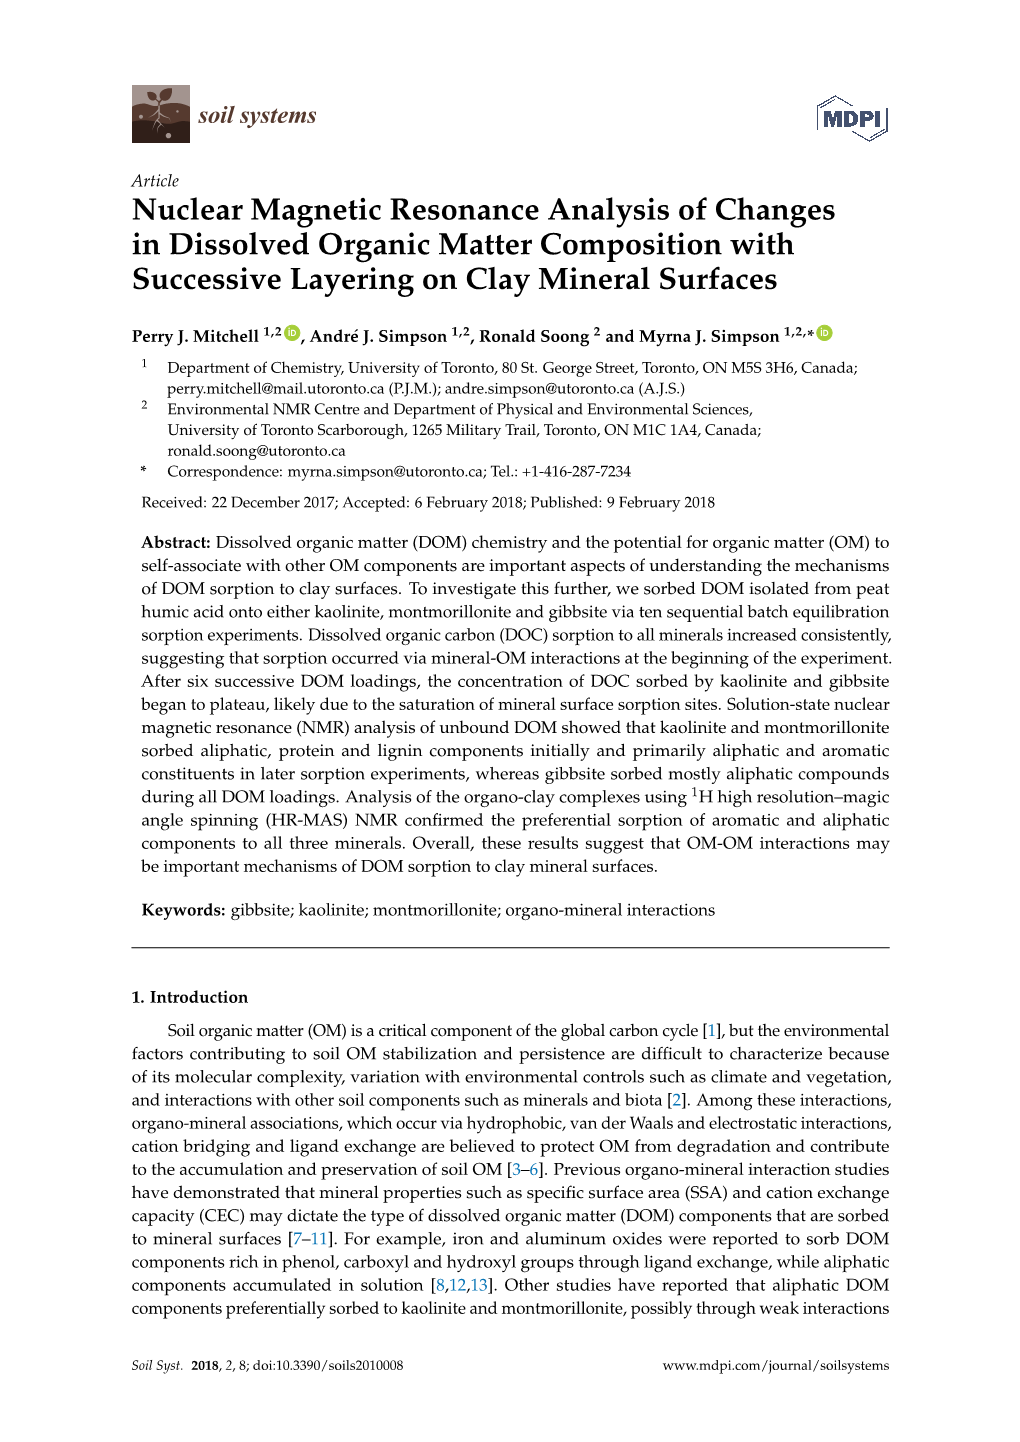 Nuclear Magnetic Resonance Analysis of Changes in Dissolved Organic Matter Composition with Successive Layering on Clay Mineral Surfaces